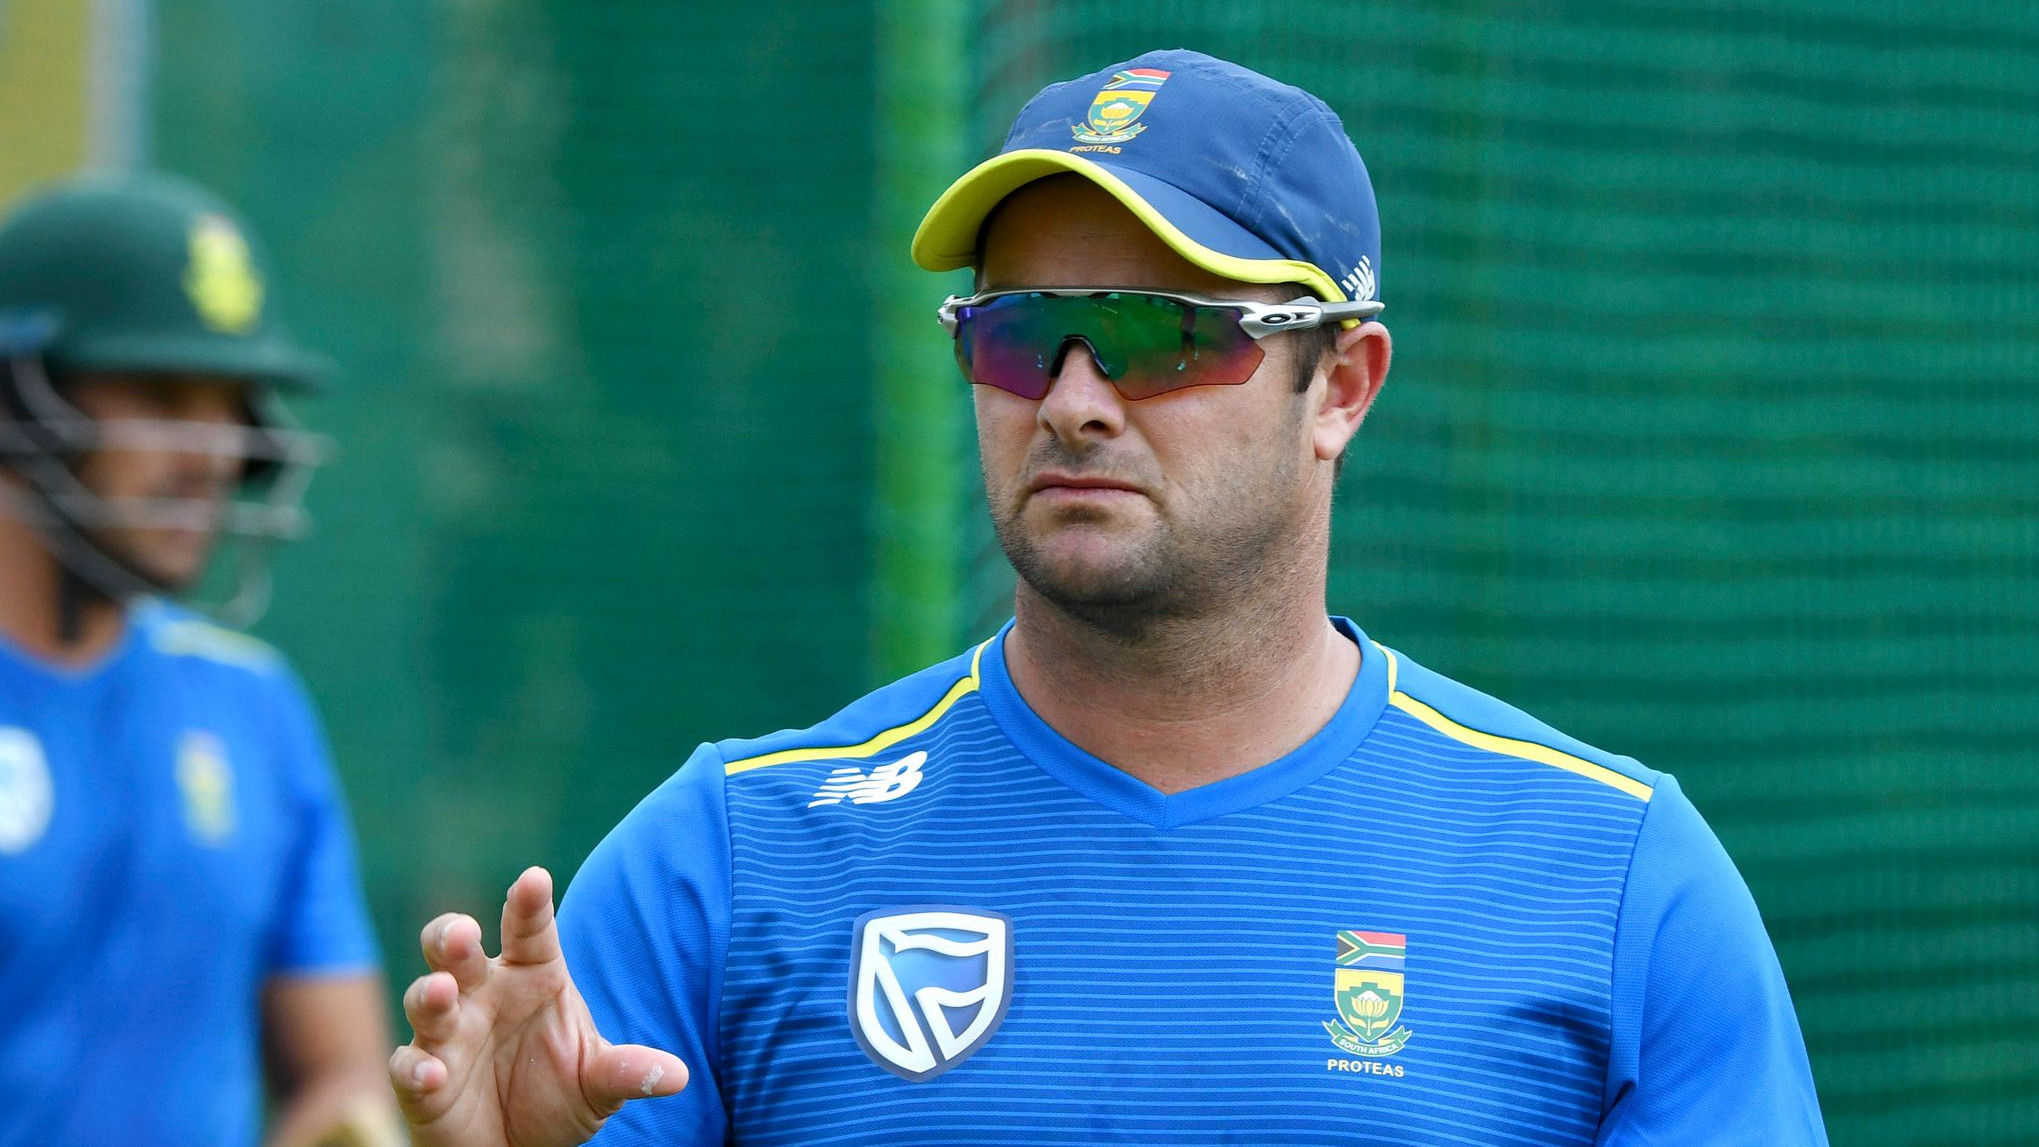 SA v PAK 2021: IPL-bound South African players will help us during T20 World Cup, says Mark Boucher